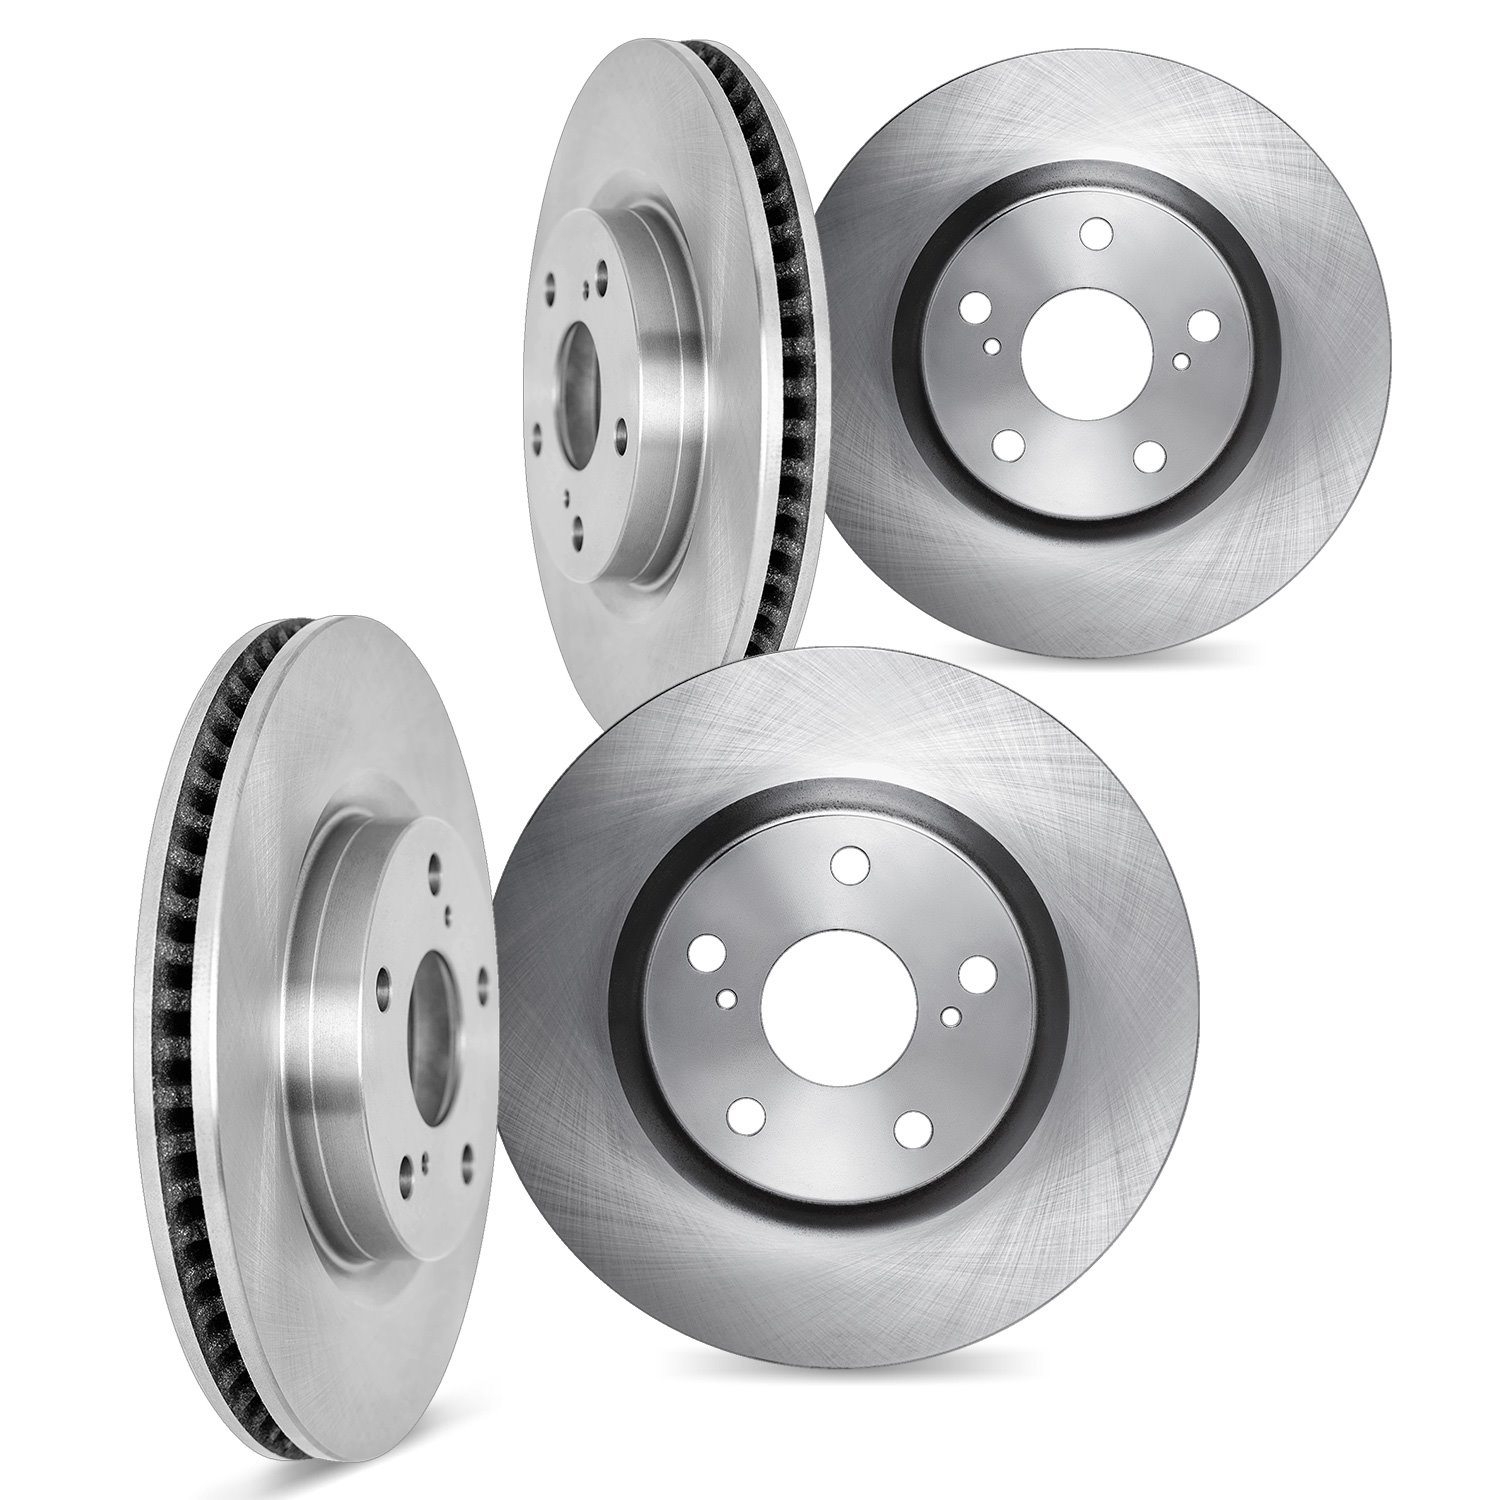 6004-75013 Brake Rotors, Fits Select Lexus/Toyota/Scion, Position: Front and Rear